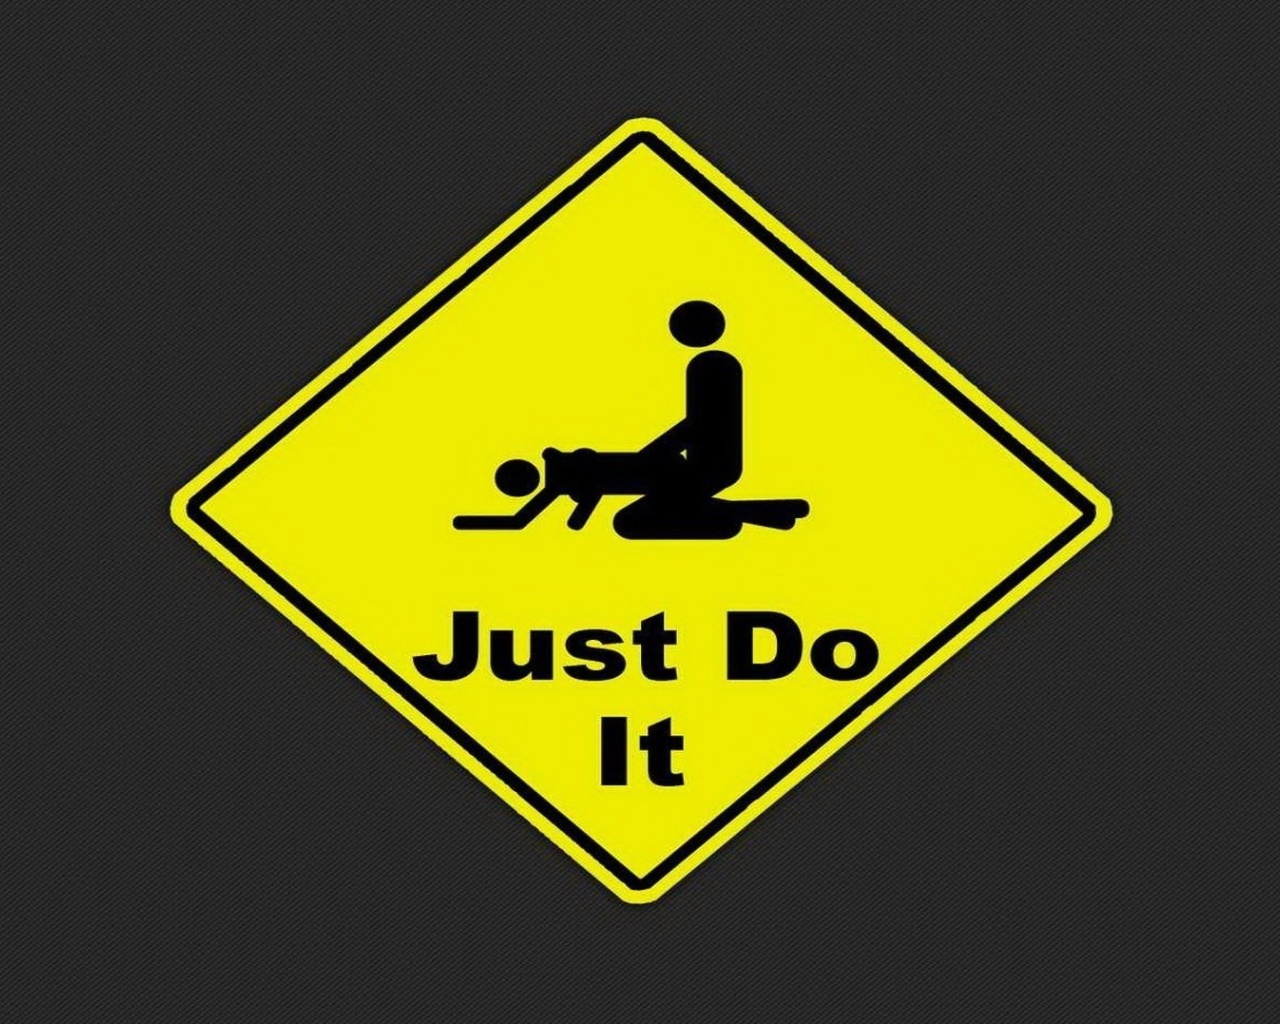 Just Do It Funny Sign screenshot #1 1280x1024